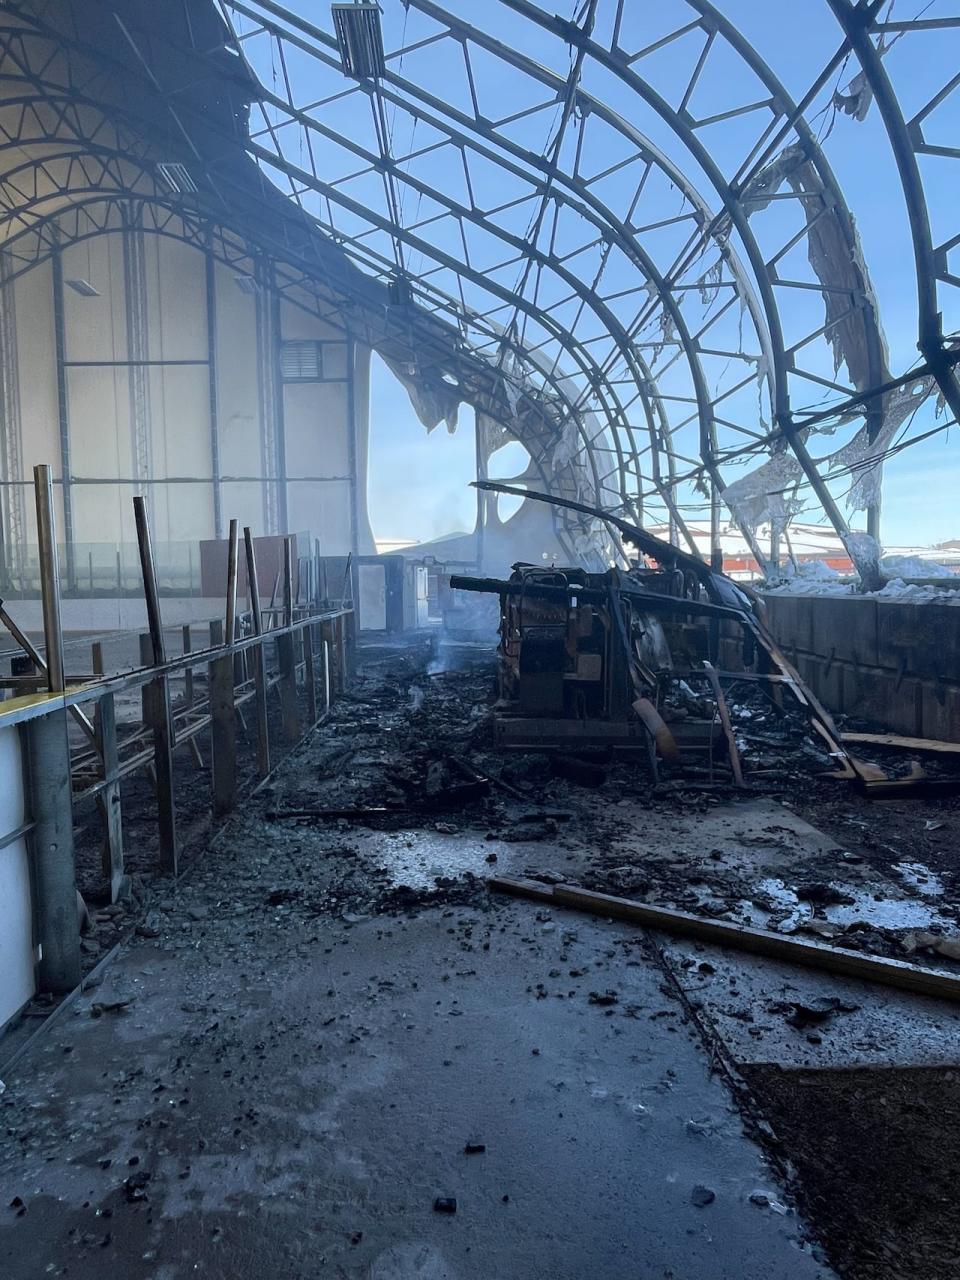 Band councillor Kevin Morin says Southend is known for being a hockey town so the loss of their only arena hits the hard. The photo shows the interior damage to the hockey arena.